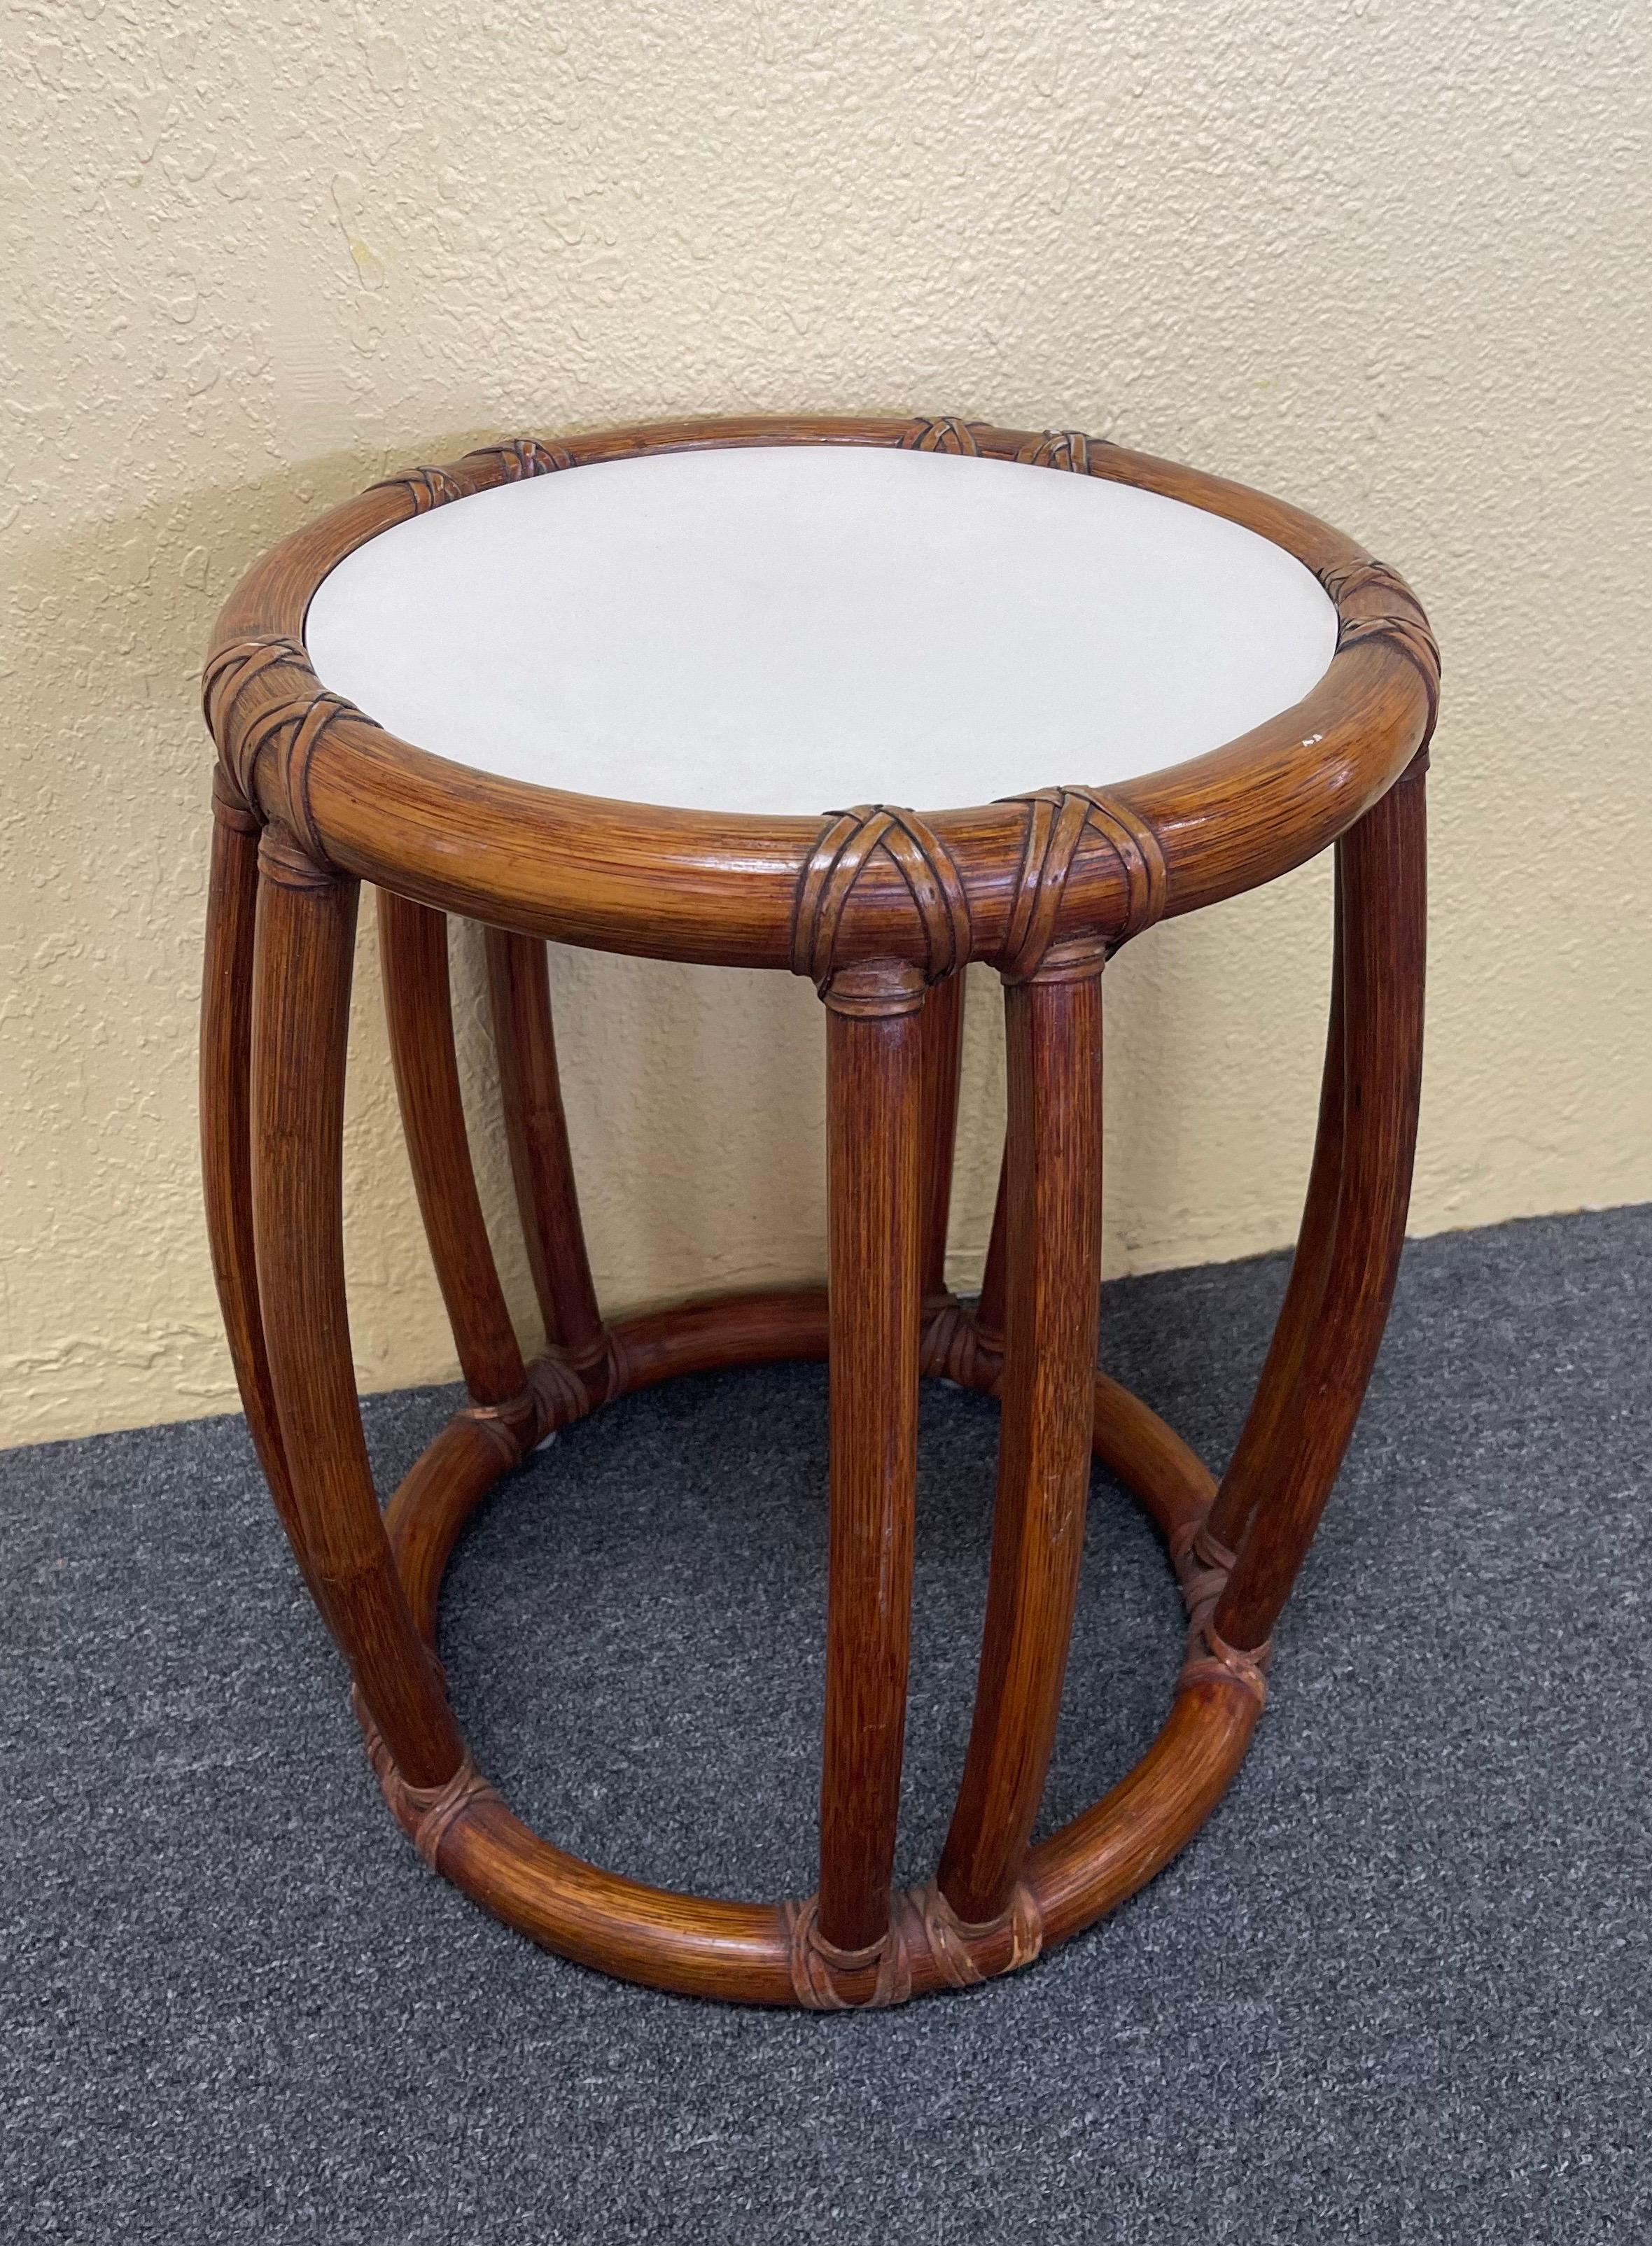 Bamboo Side Tables / Garden Stools by McGuire Furniture Co. of San Francisco 2